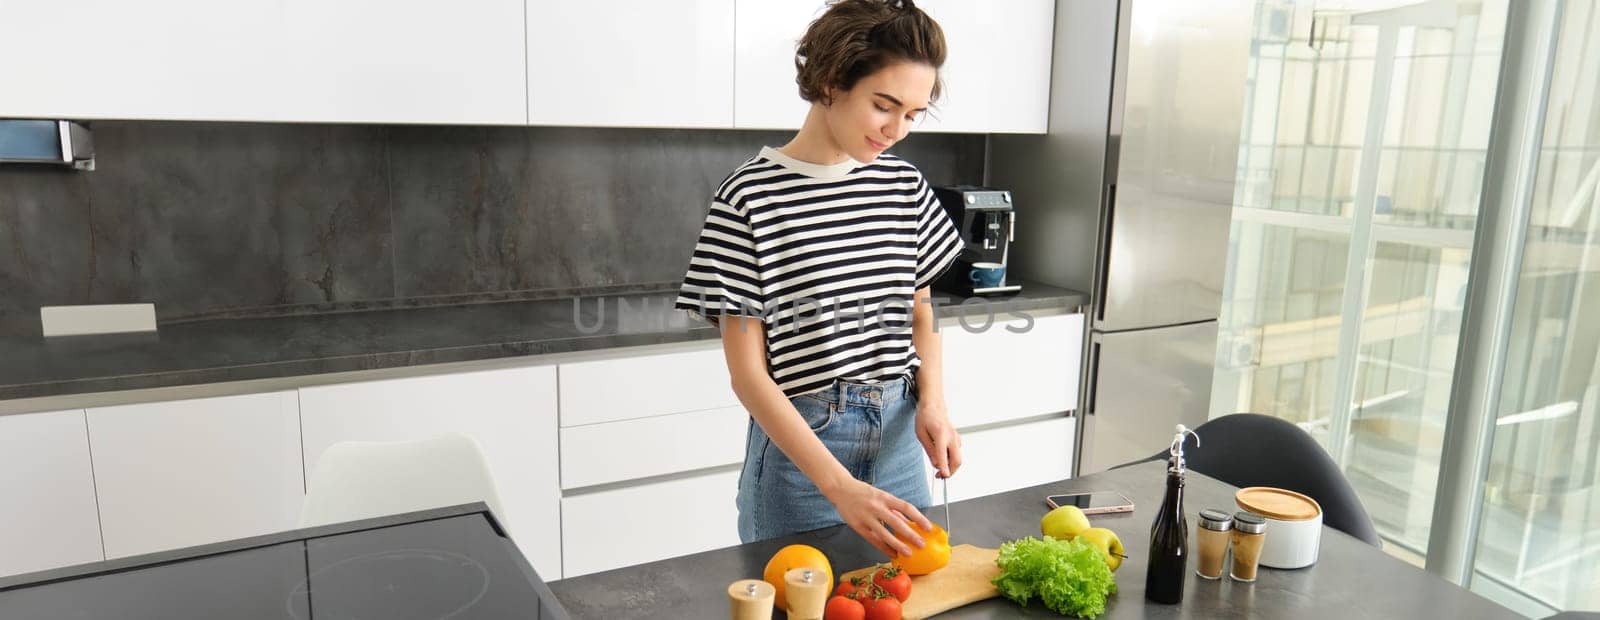 Portrait of modern young woman standing in the kitchen with vegetables, chopping them on counter, holding knife, cooking meal, vegetarian food, concept of healthy lifestyle an diet.